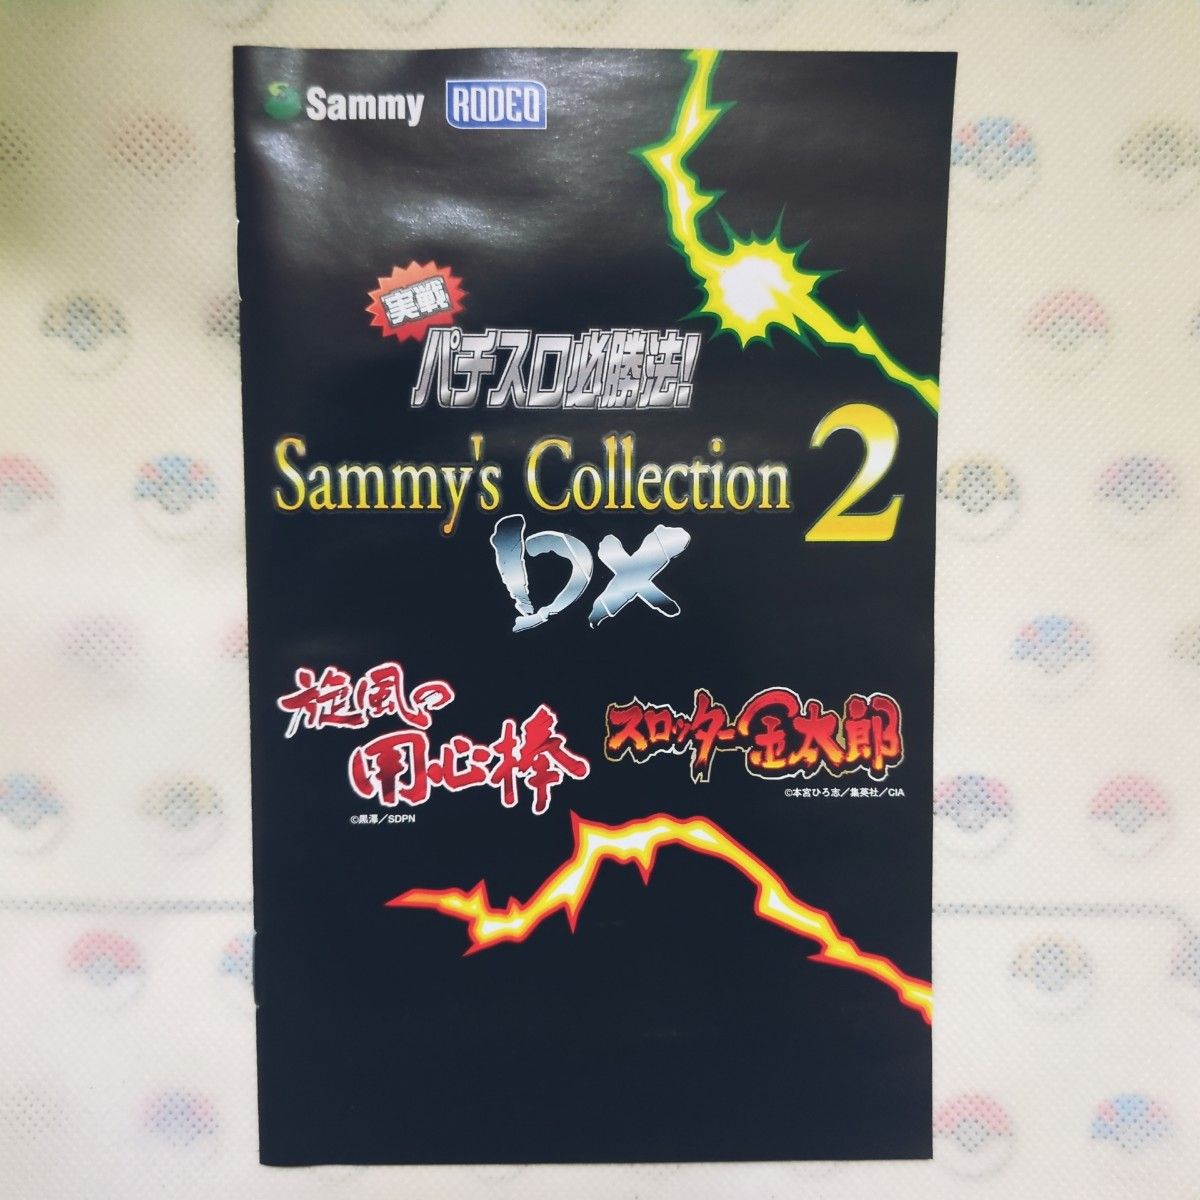 【PS2】 実戦パチスロ必勝法！ Sammy Collection2 DX【ハガキ・シール付】